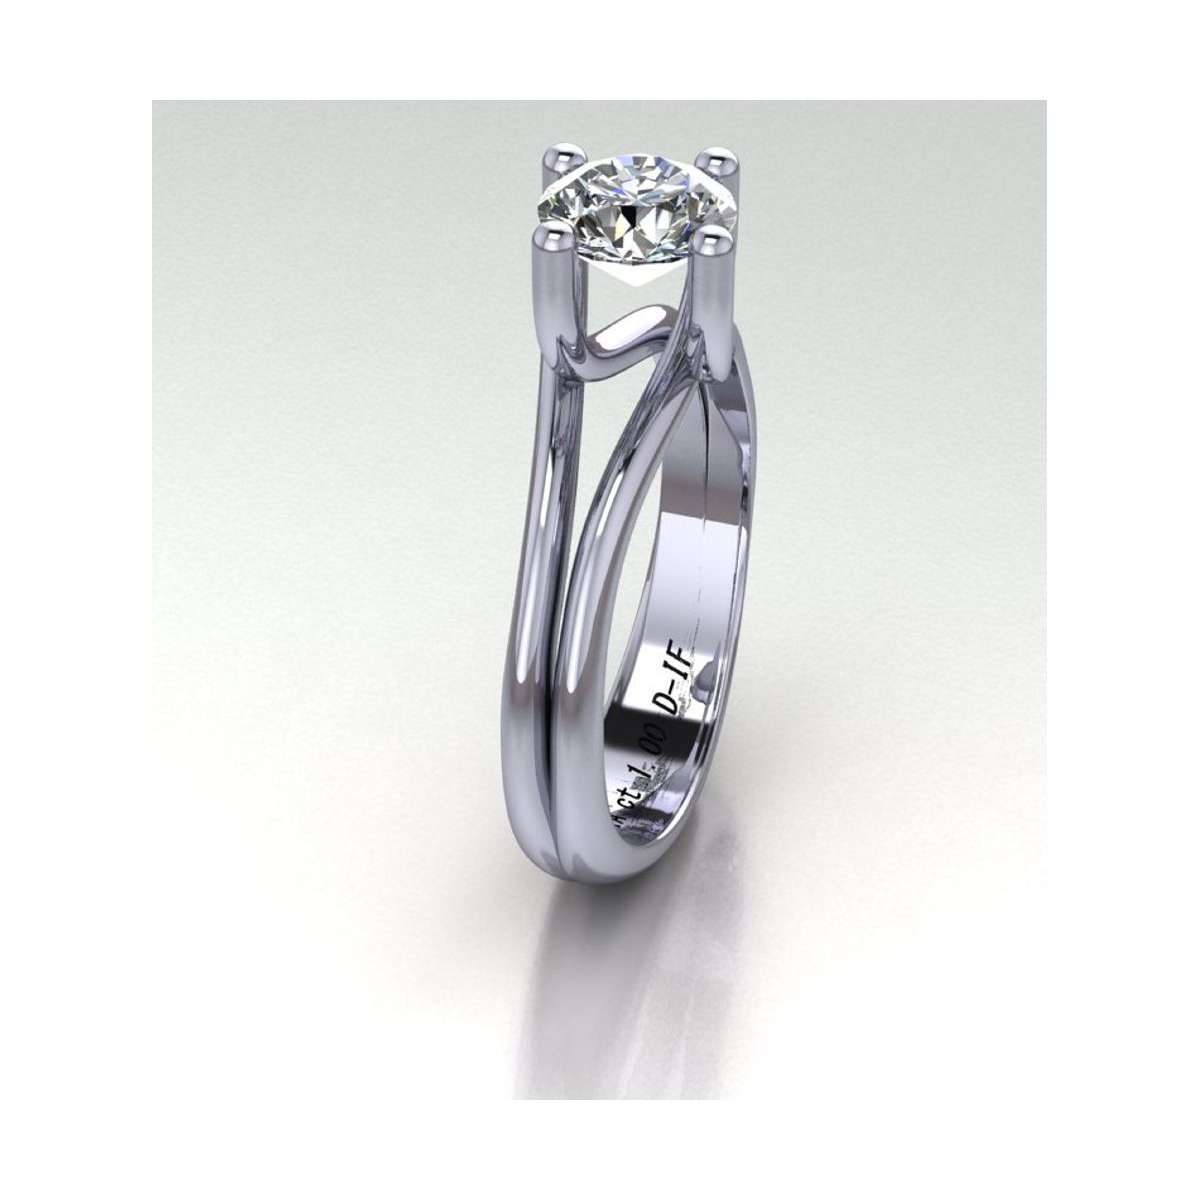 Platinum solitaire ring four claws GIA certified diamond 1.00 carats flawless D-IF